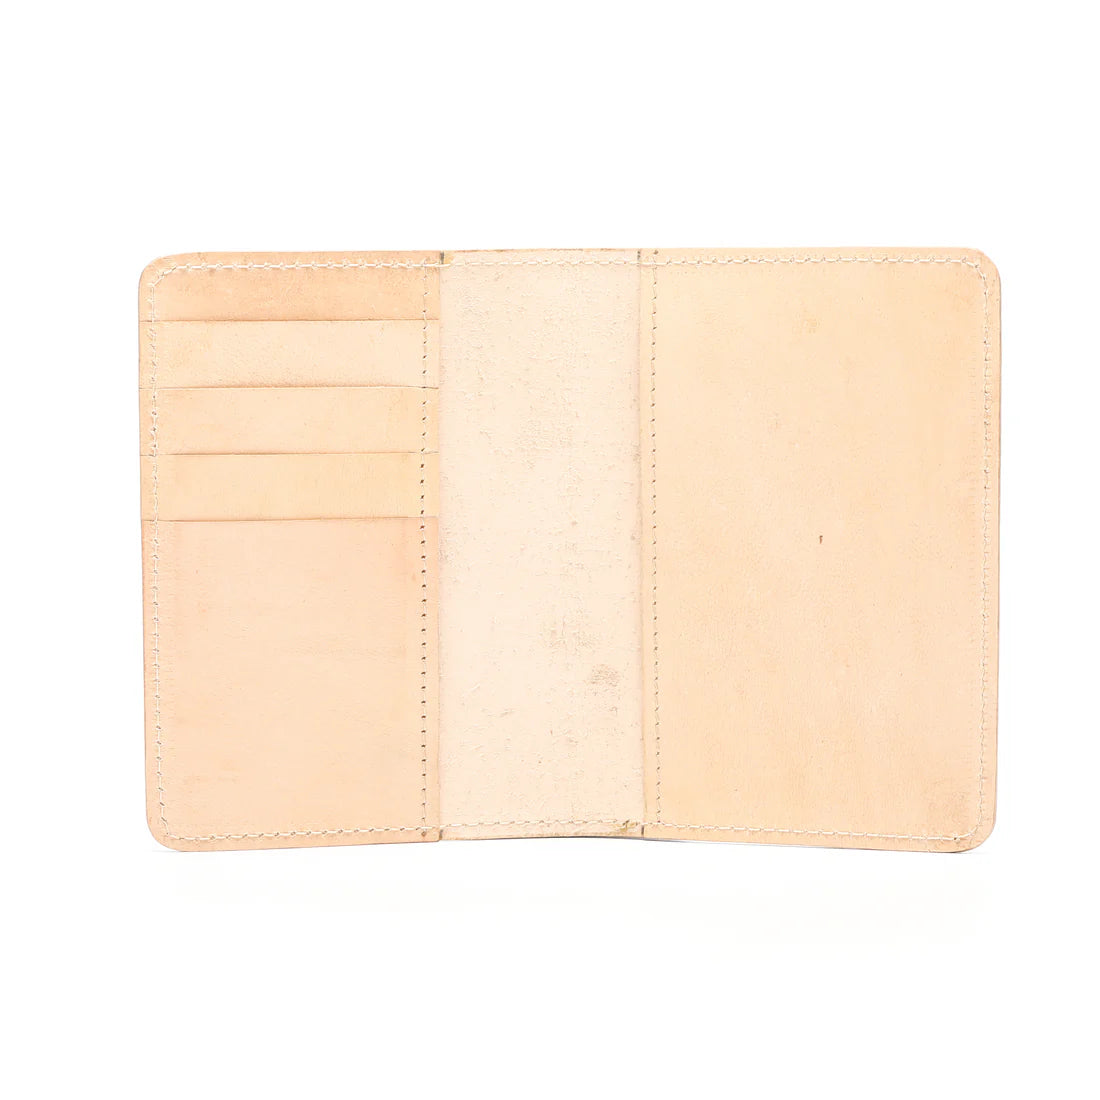 Inside view of the beige color passport cover with multiple pocket to hold your cards.